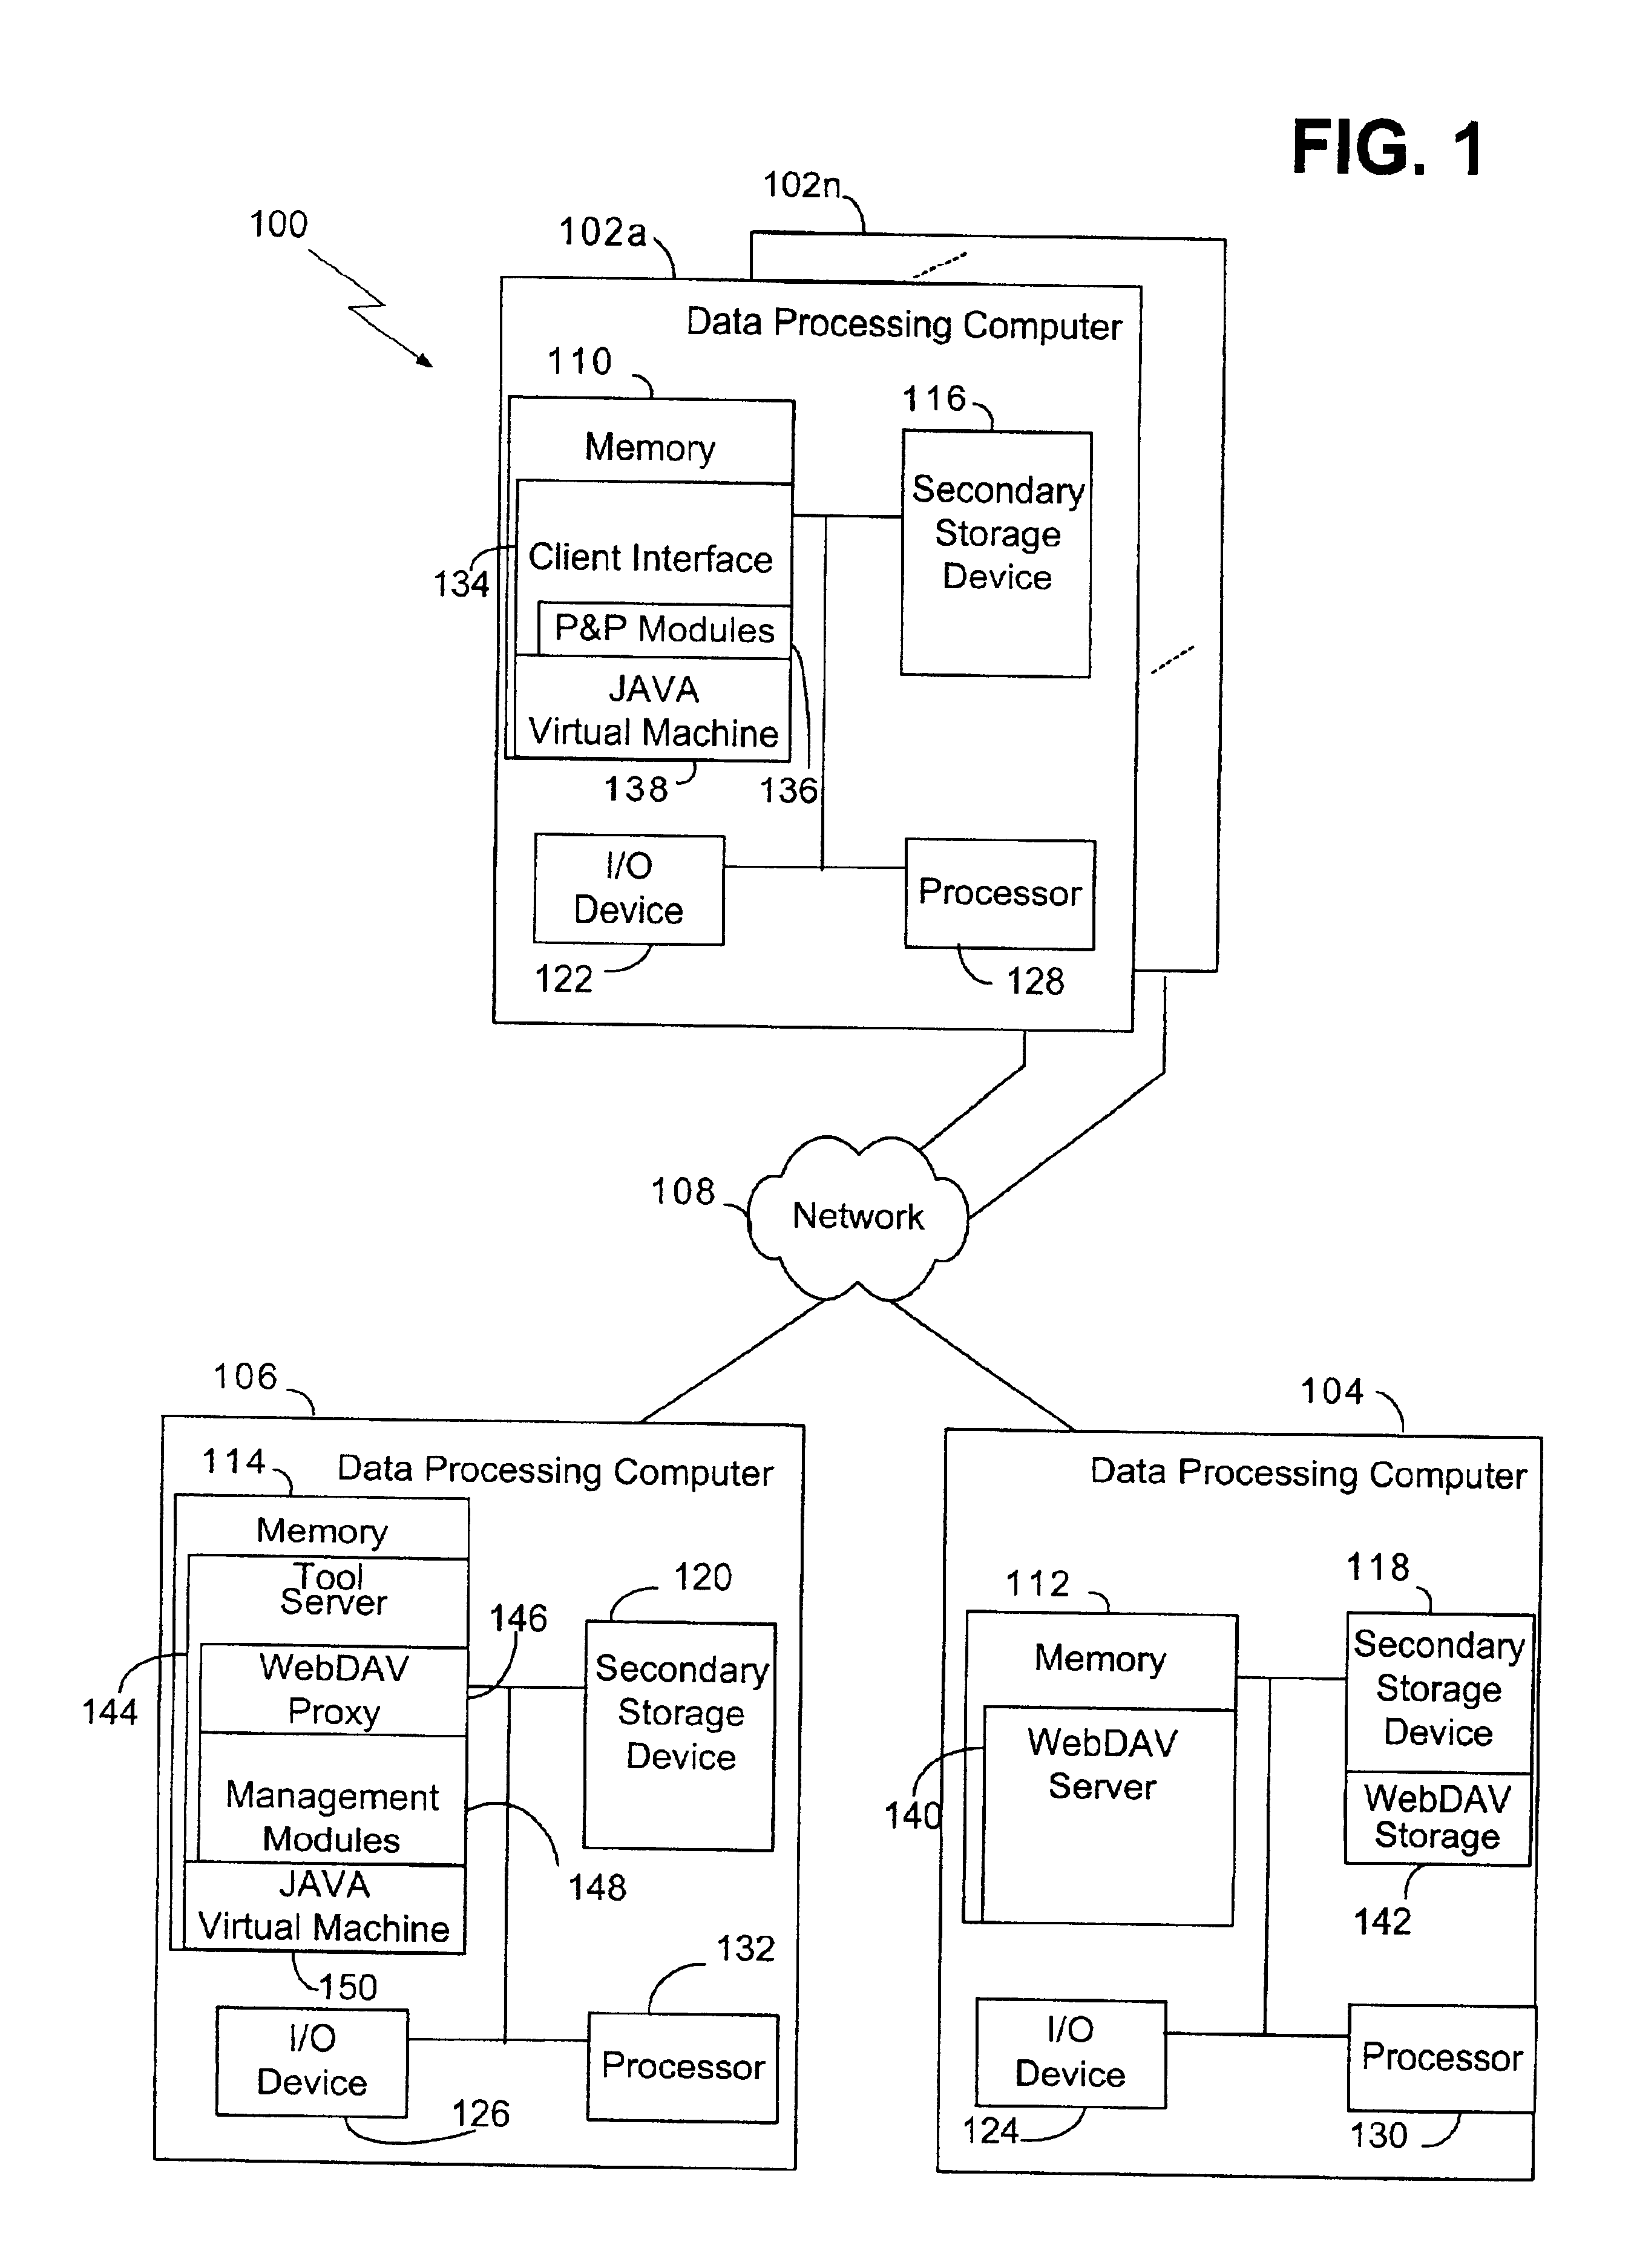 Methods and systems for improving a workflow based on data mined from plans created from the workflow